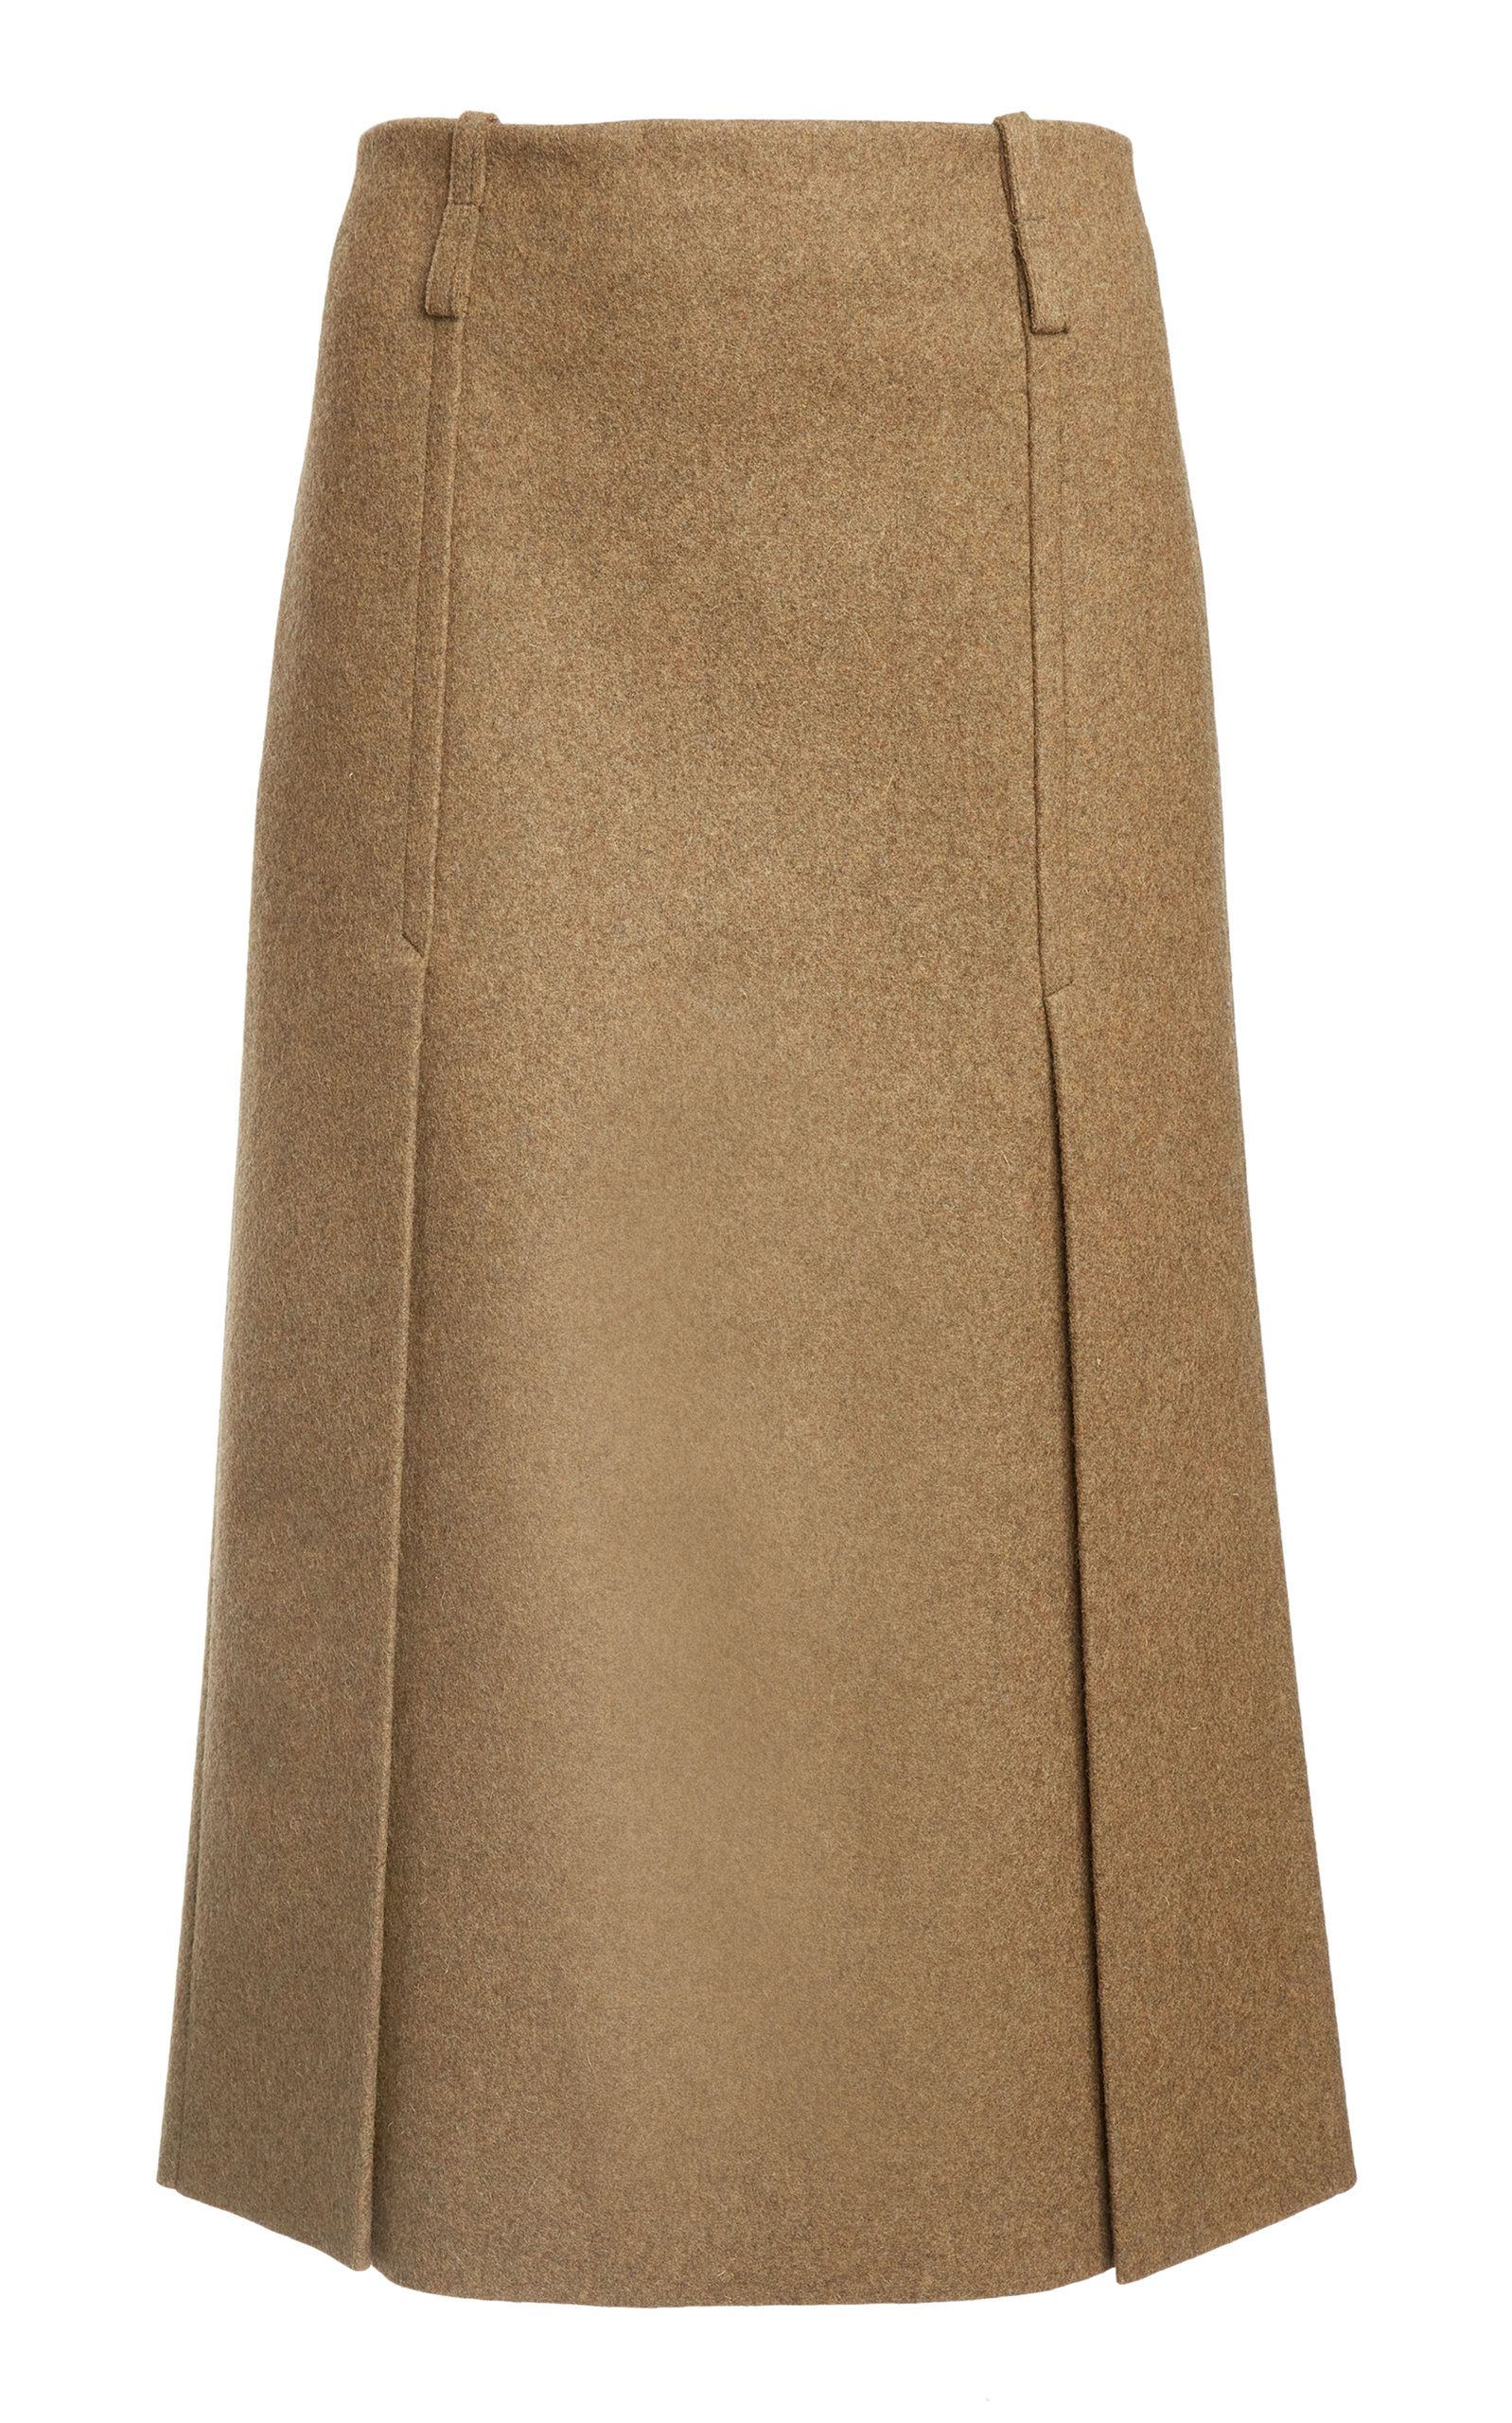 Classic Comfort: Wool Skirts for Winter Warmth